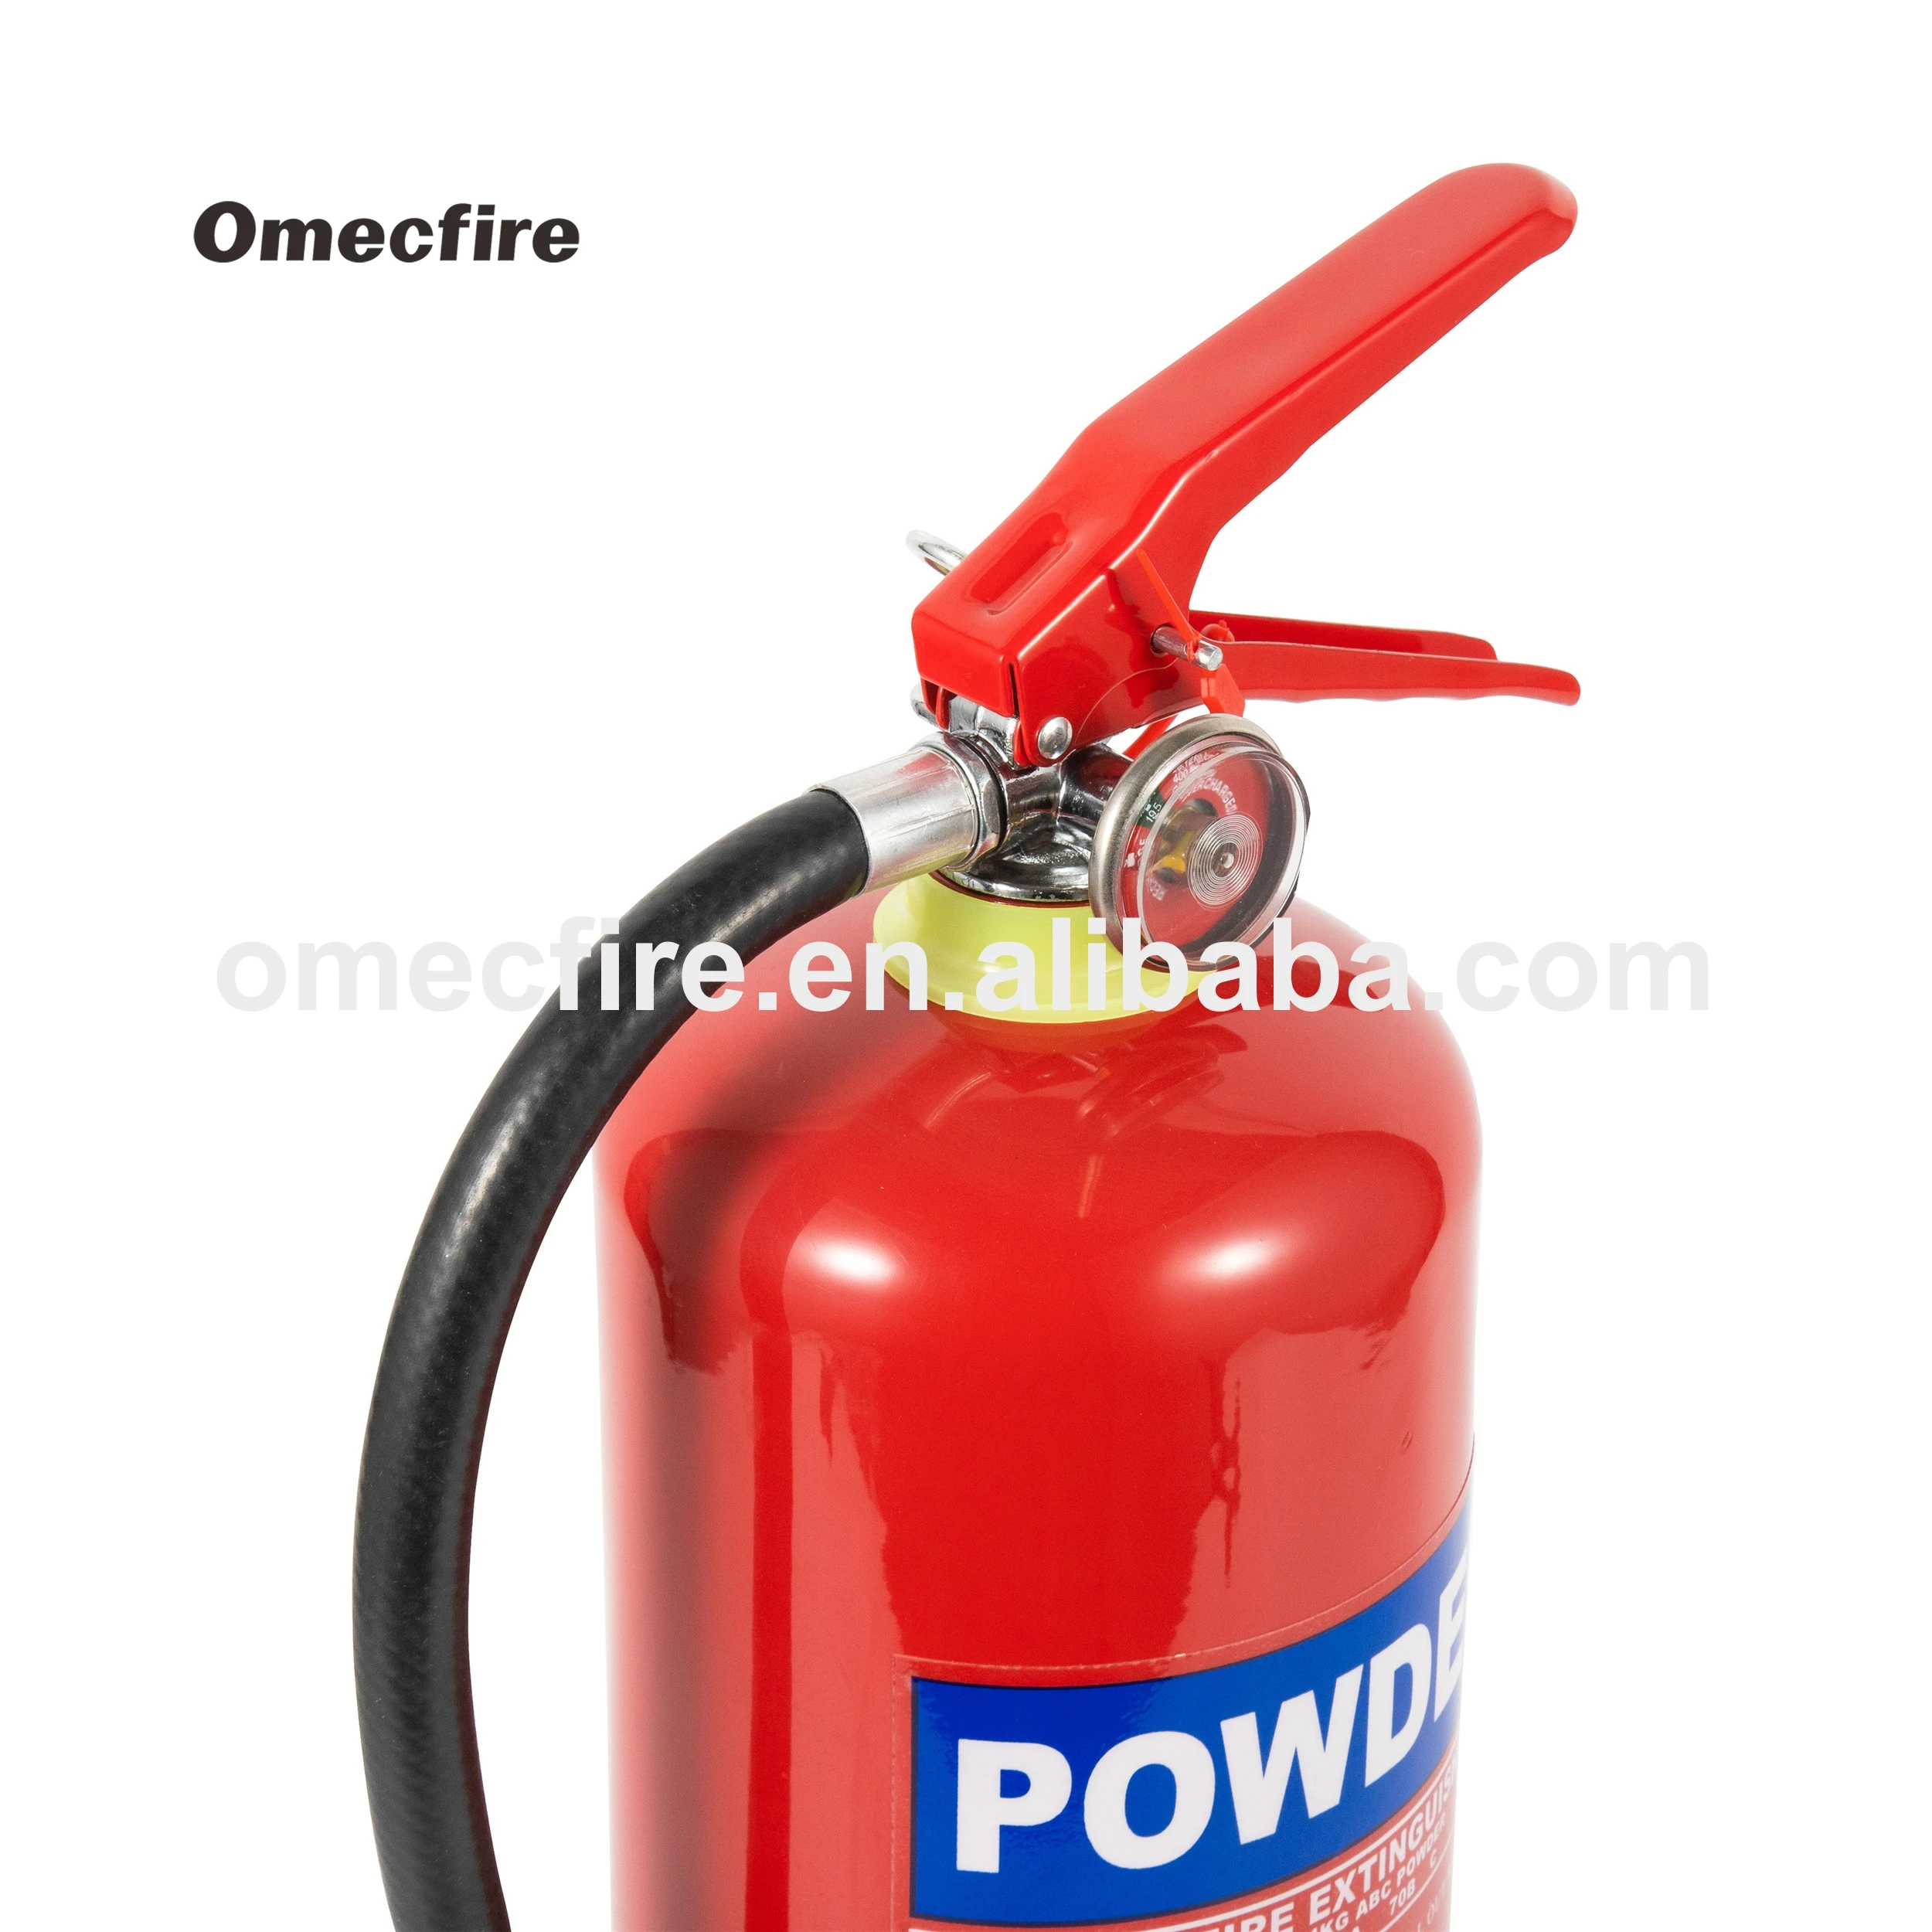 Abc Chemical Dry Powder Bottom Hoop Fire Extinguisher 4kg Capacity Iso Standard